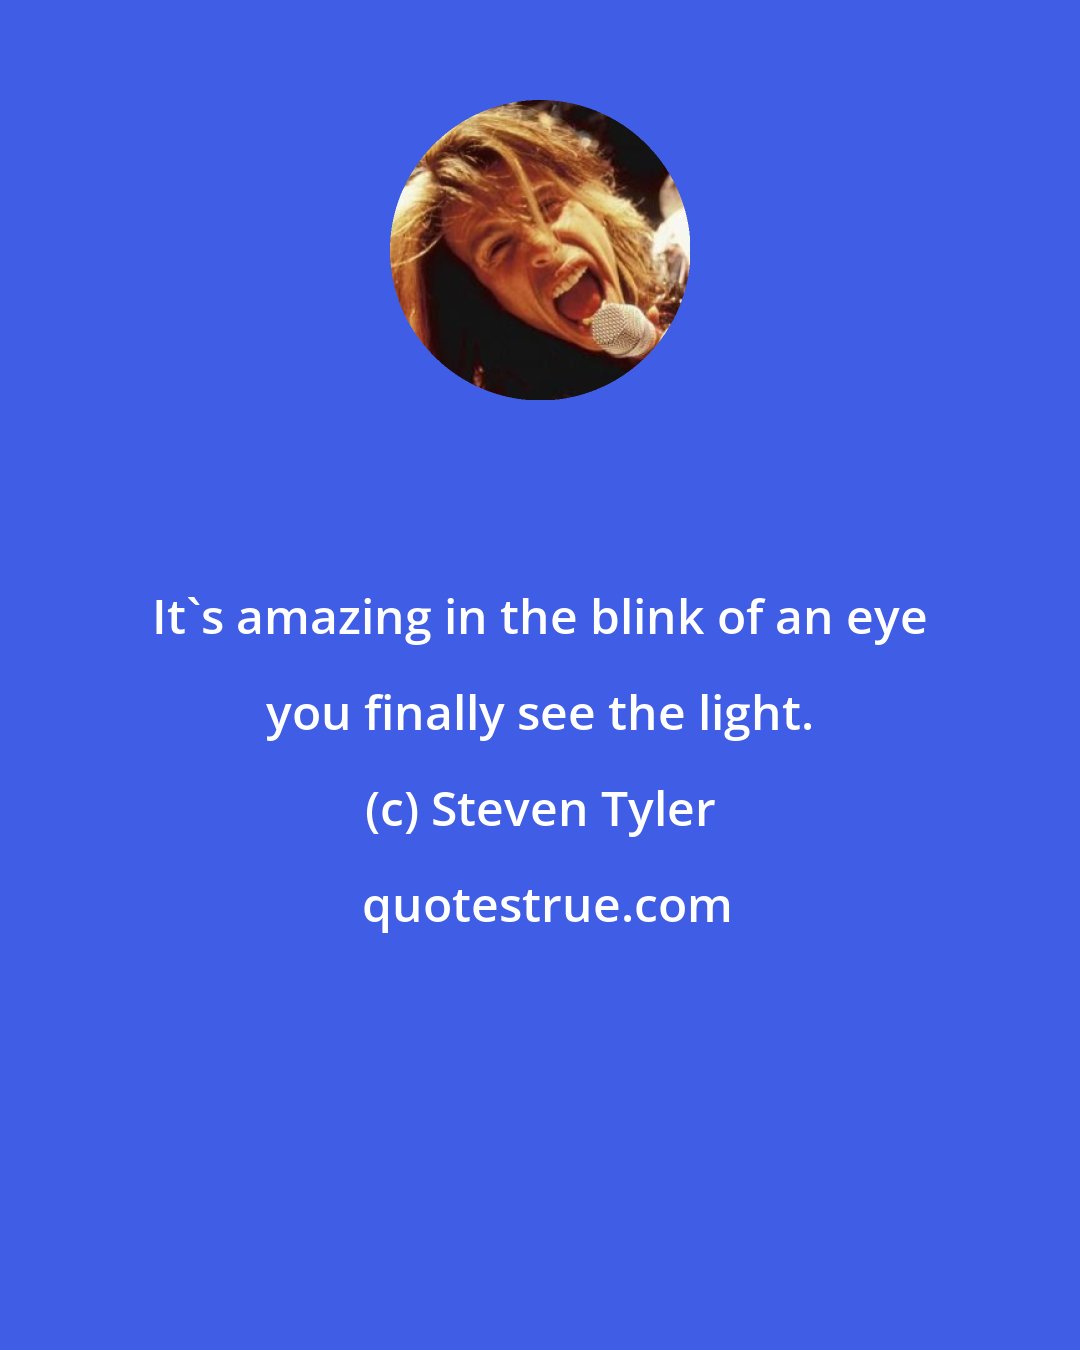 Steven Tyler: It's amazing in the blink of an eye you finally see the light.